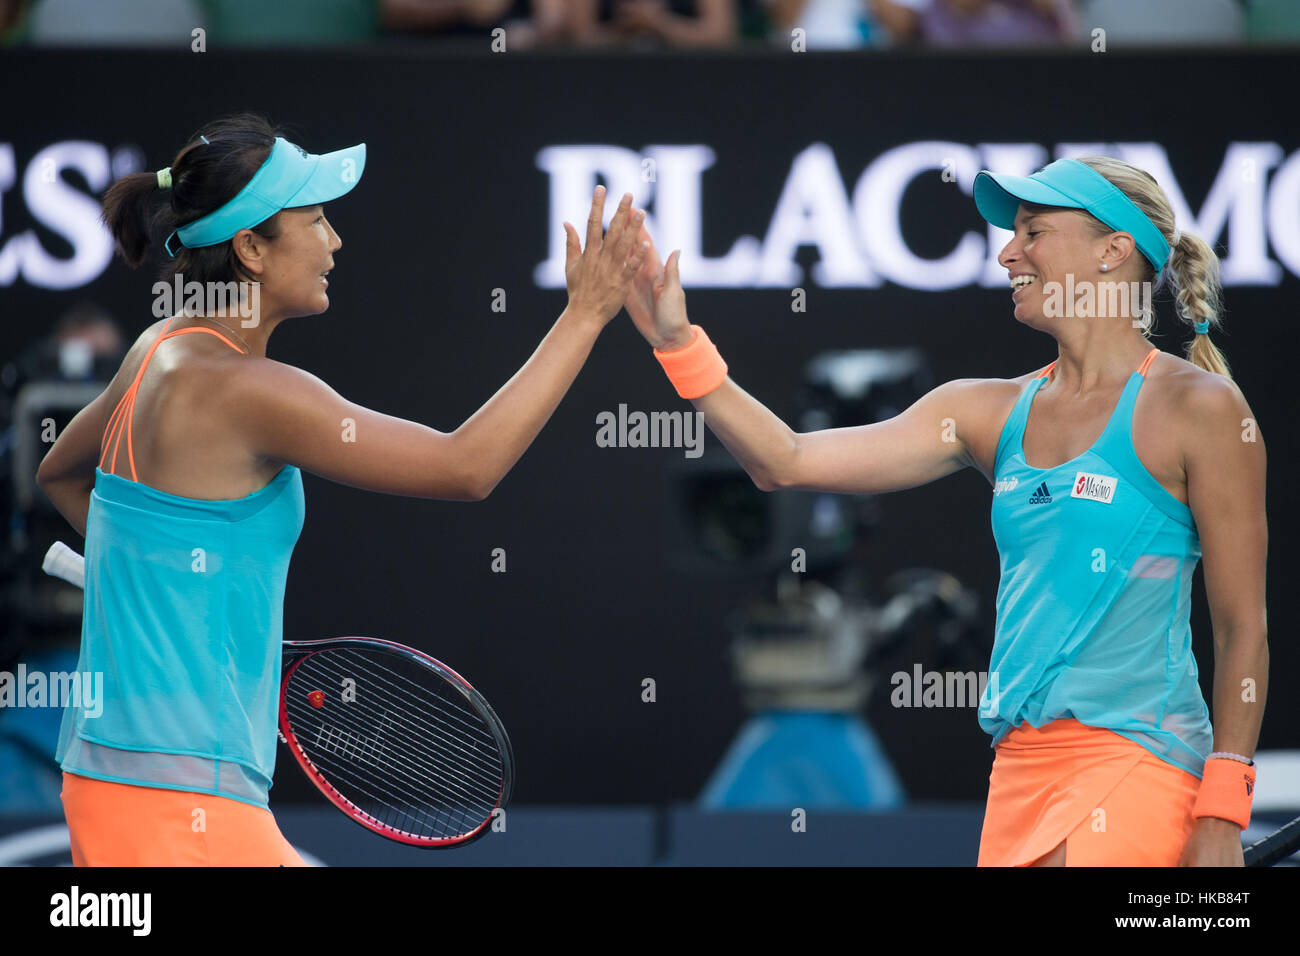 Melbourne, Australia. 27th Jan, 2017. Andrea Hlavackova of the Czech Republic and Peng Shuai (L) of China clap hands during the women's doubles final against Bethanie Mattek-Sands of the U.S. and Lucie Safarova of the Czech Republic at the Australian Open tennis championships in Melbourne, Australia, Jan. 27, 2017. Bethanie Mattek-Sands of the U.S. and Lucie Safarova of the Czech Republic won 2-1. Credit: Bai Xue/Xinhua/Alamy Live News Stock Photo